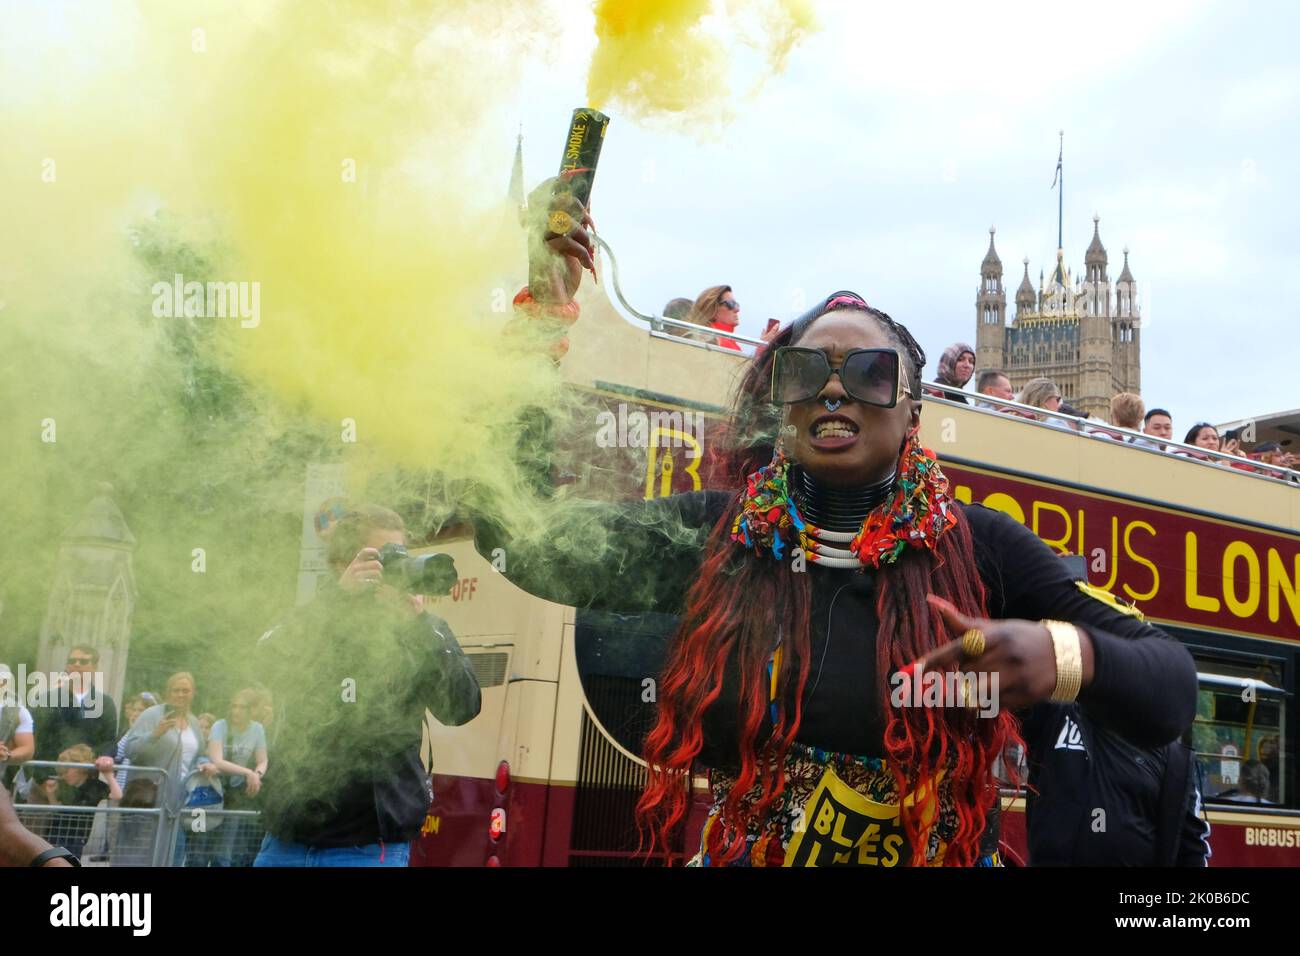 London, UK. 10th September, 2022. Activist Marvina Newton holds a yellow smoke grenade as she walks with hundreds of Black Lives Matters protesters marching from Parliament Square to New Scotland Yard following a fatal shooting of father-to-be Chris Kaba, an unarmed black man, last Monday in south London by police.  The IOPC are treating the investigation as homicide. Credit: Eleventh Hour Photography/Alamy Live News Stock Photo